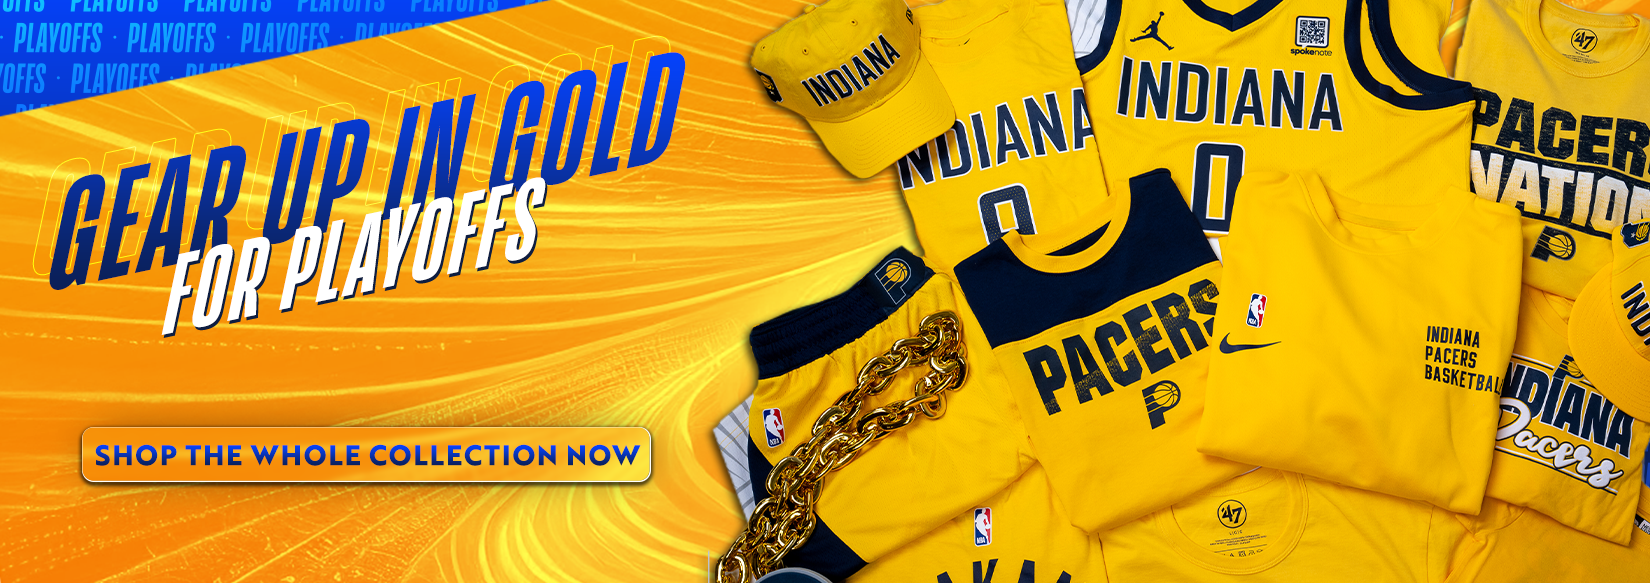 Gear Up In Gold For Playoffs SHOP THE WHOLE COLLECTION NOW